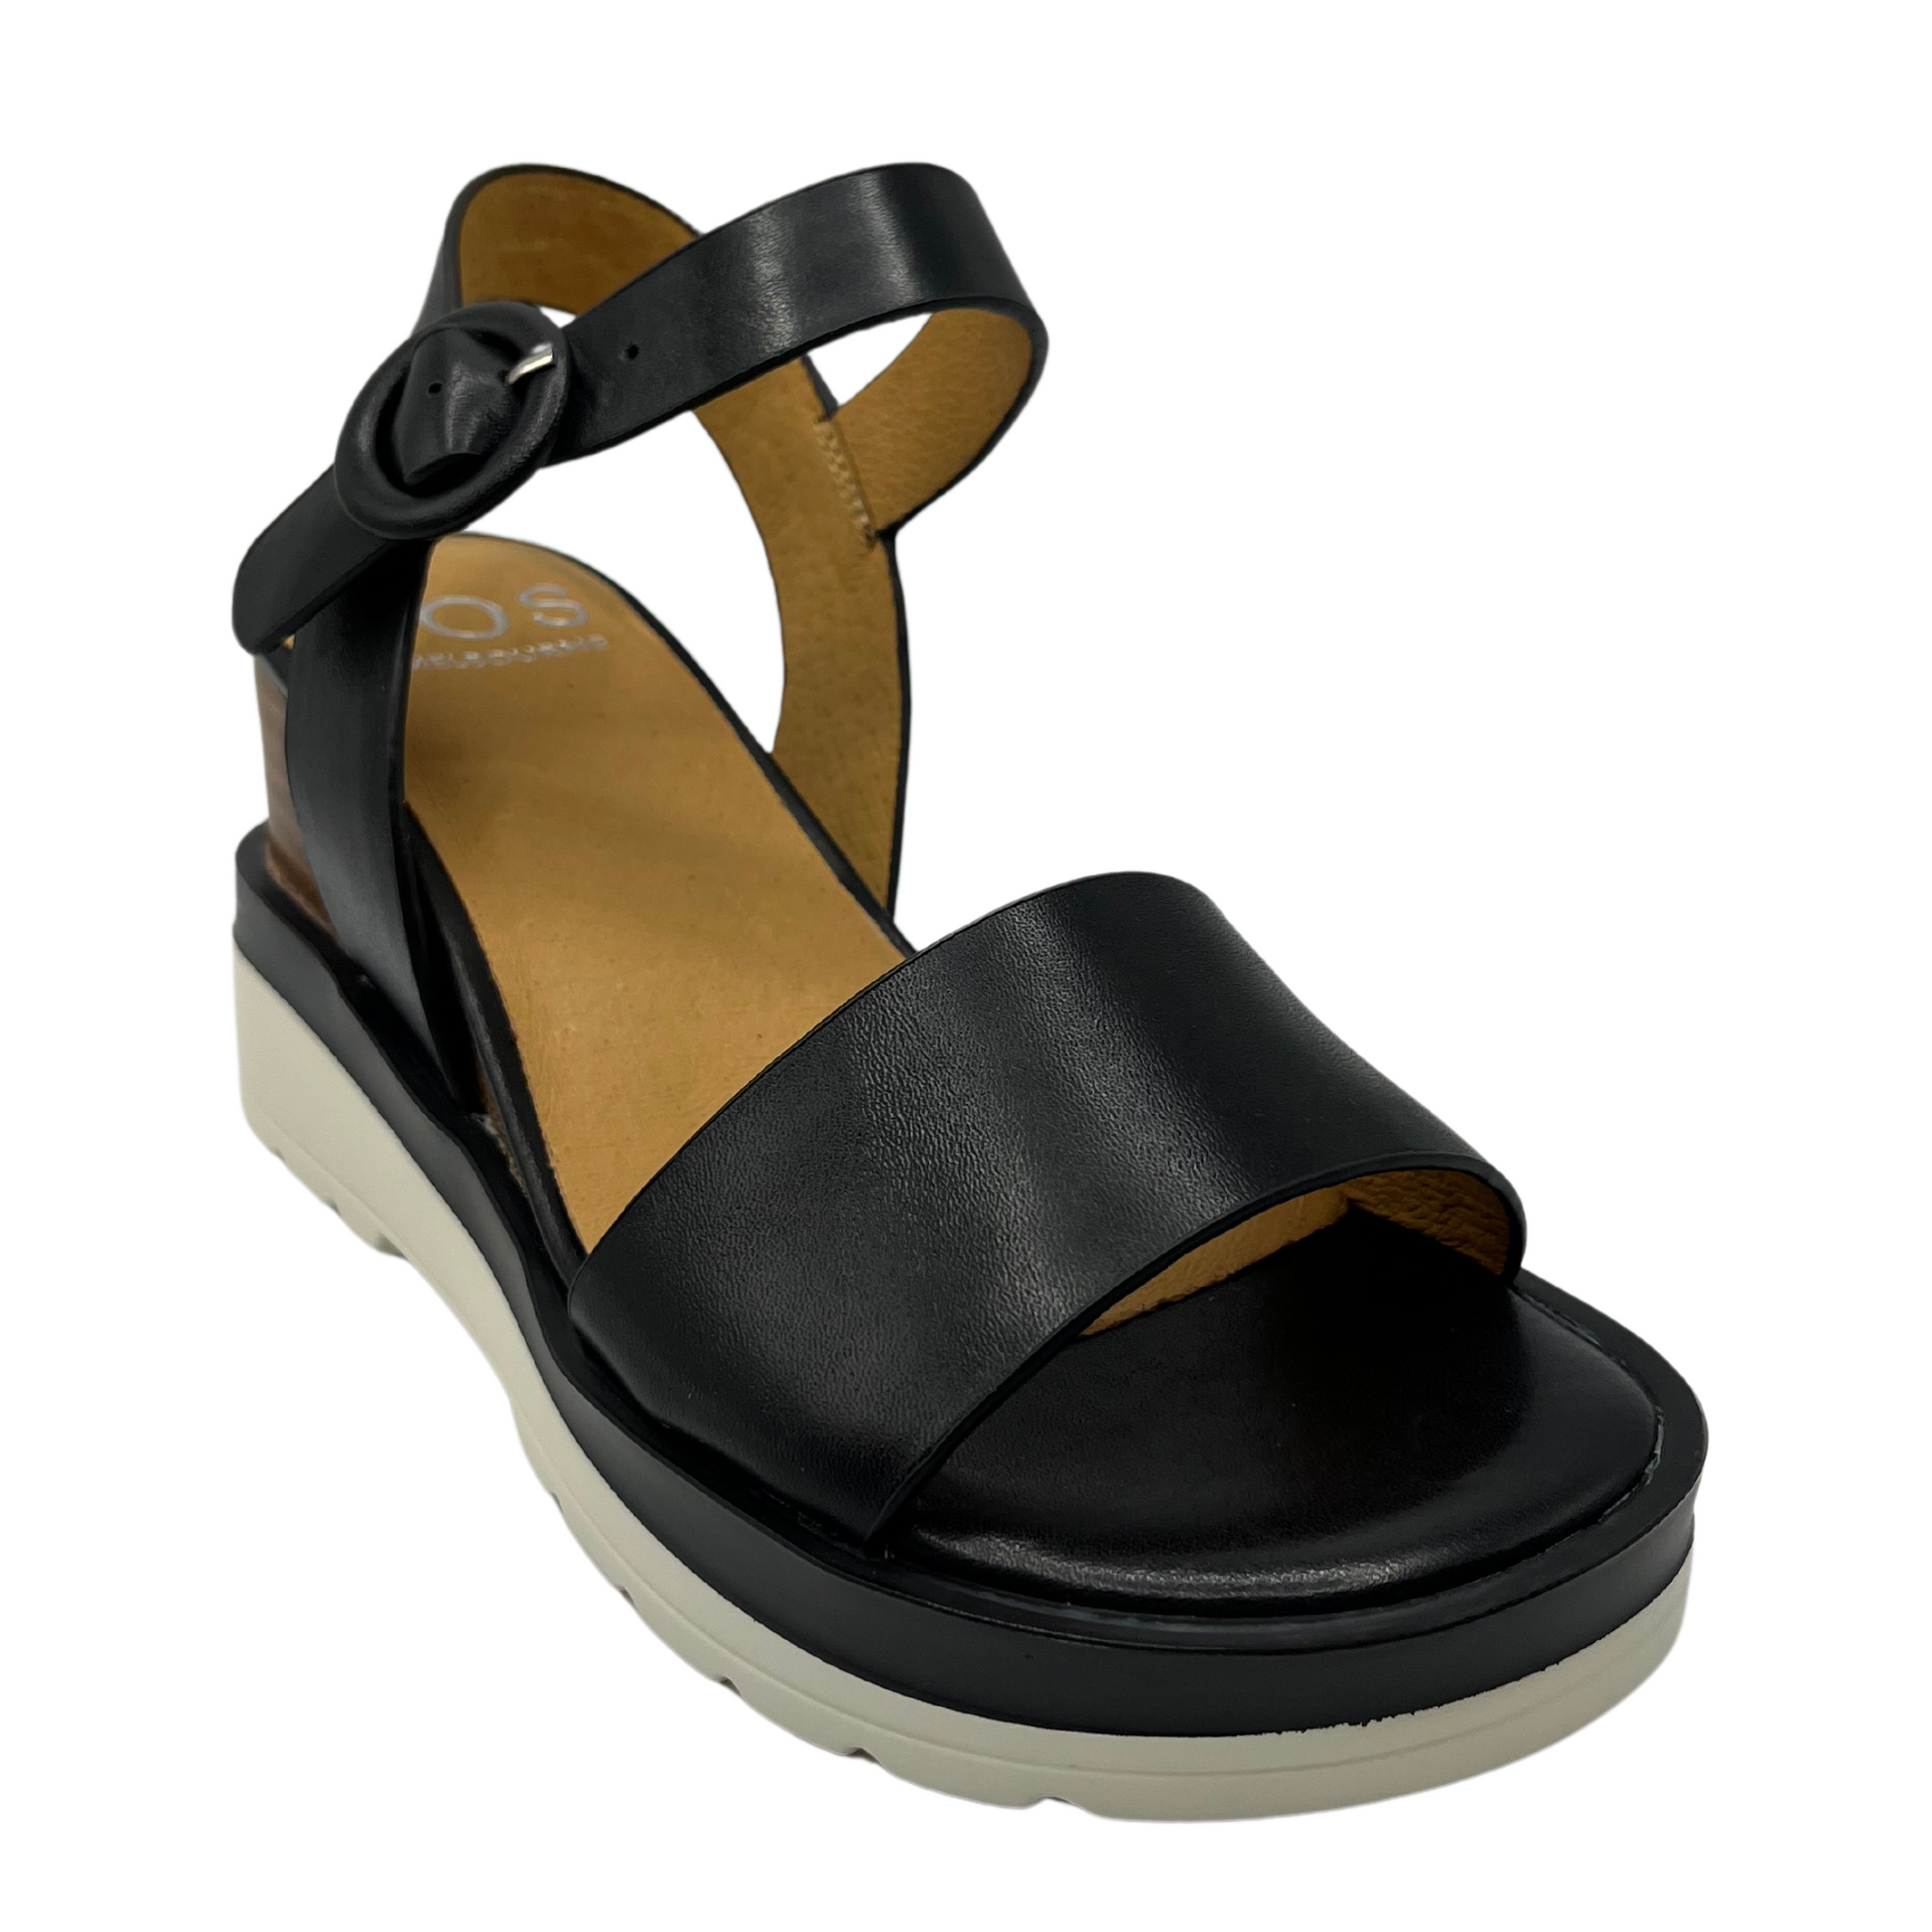 45 degree angled view of black wedge sandal with buckle ankle strap, rounded toe with black and white rubber outsole